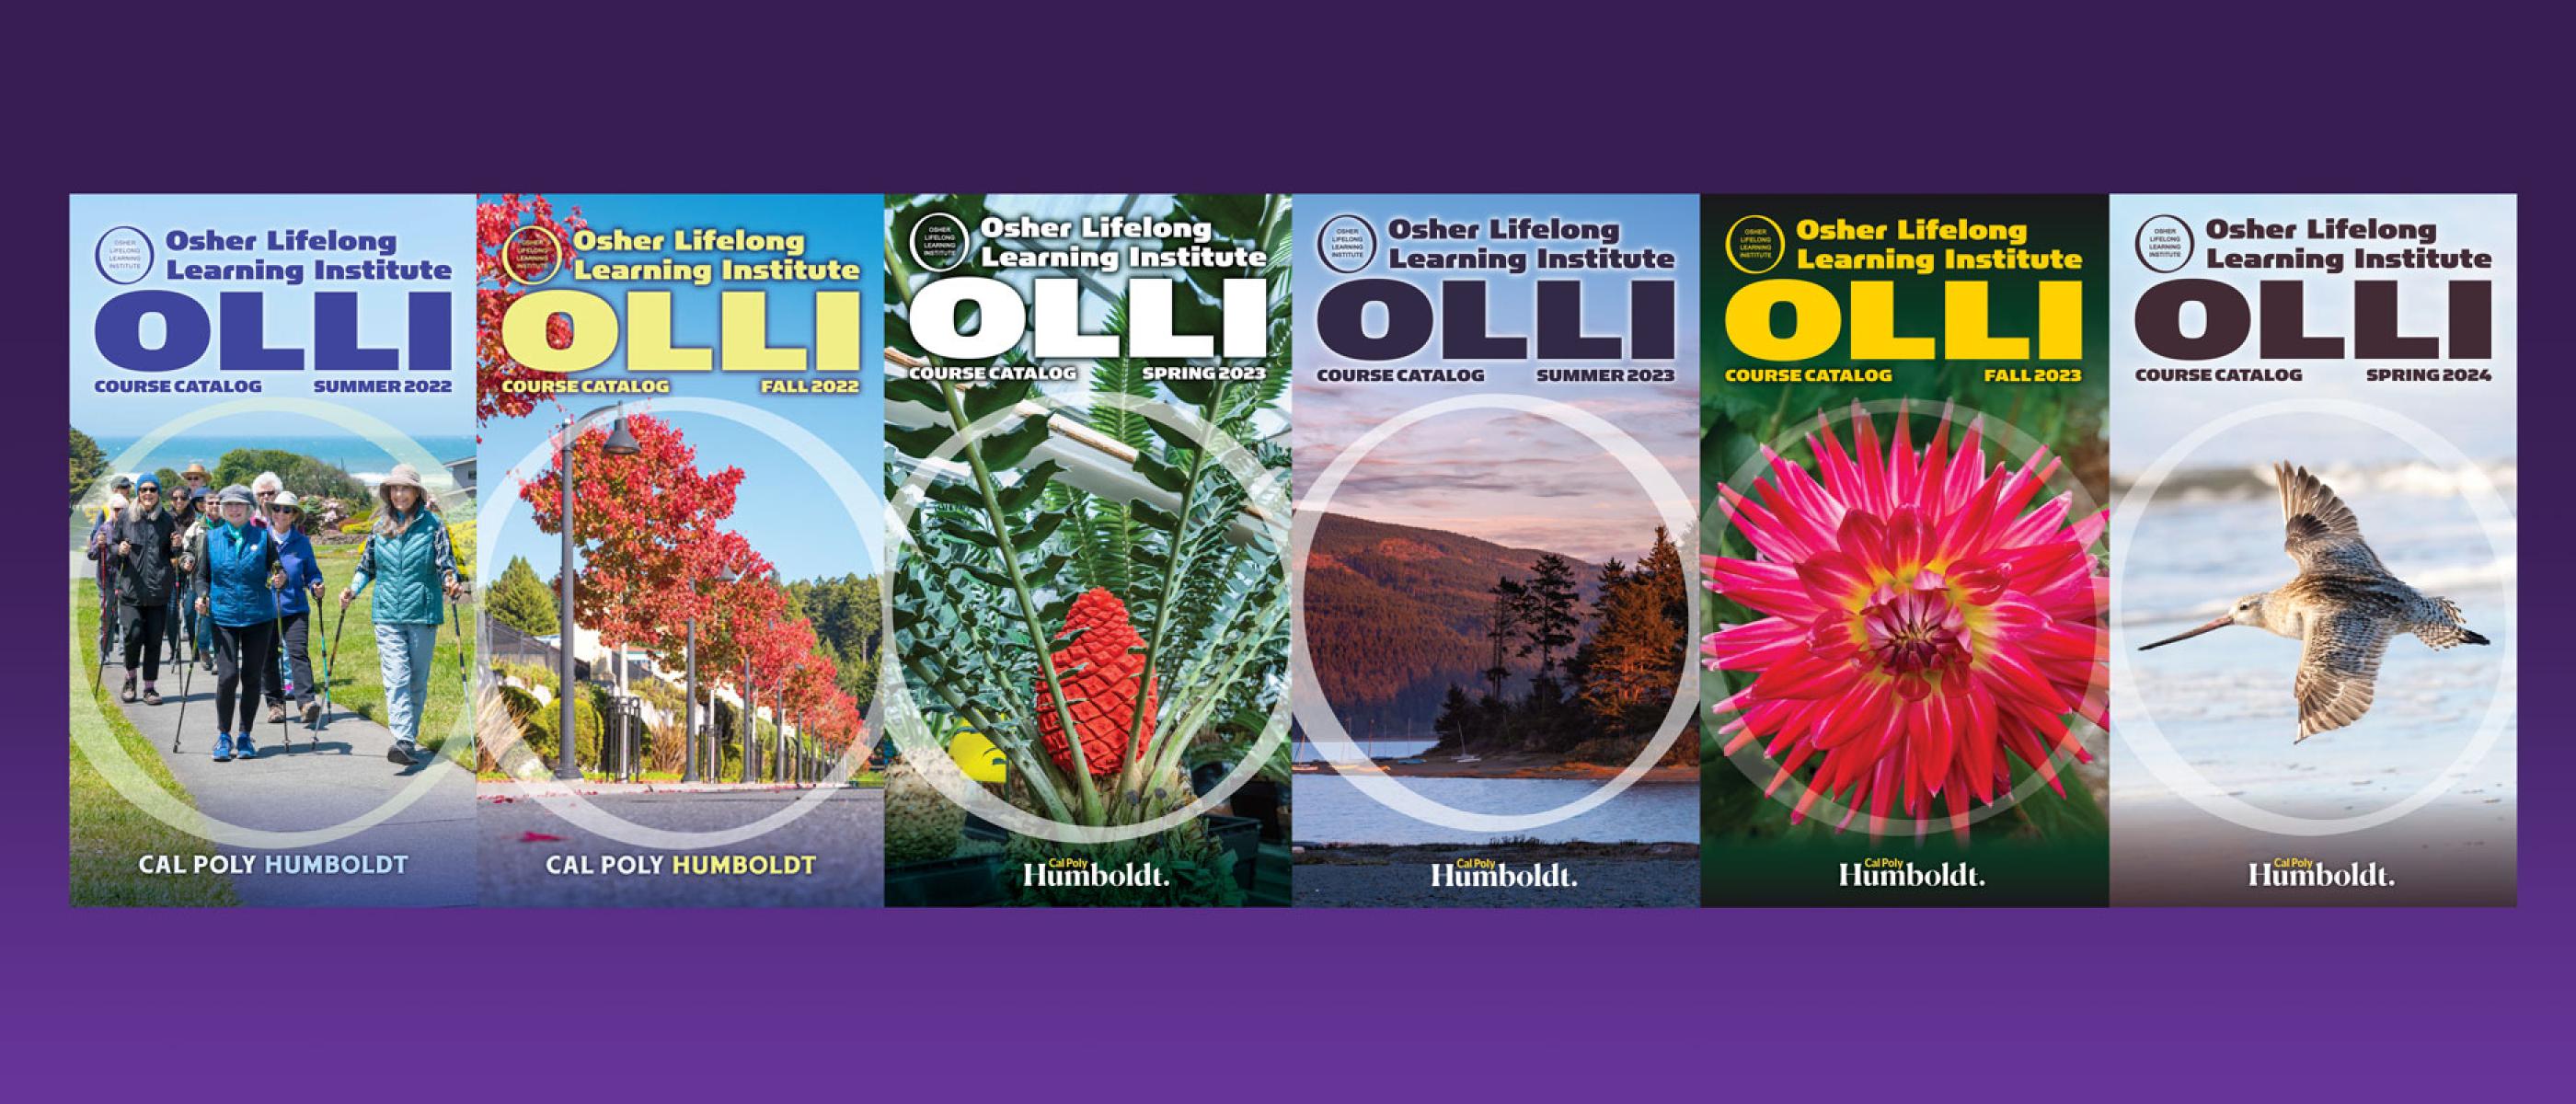 Covers of OLLI course catalogs over the past year